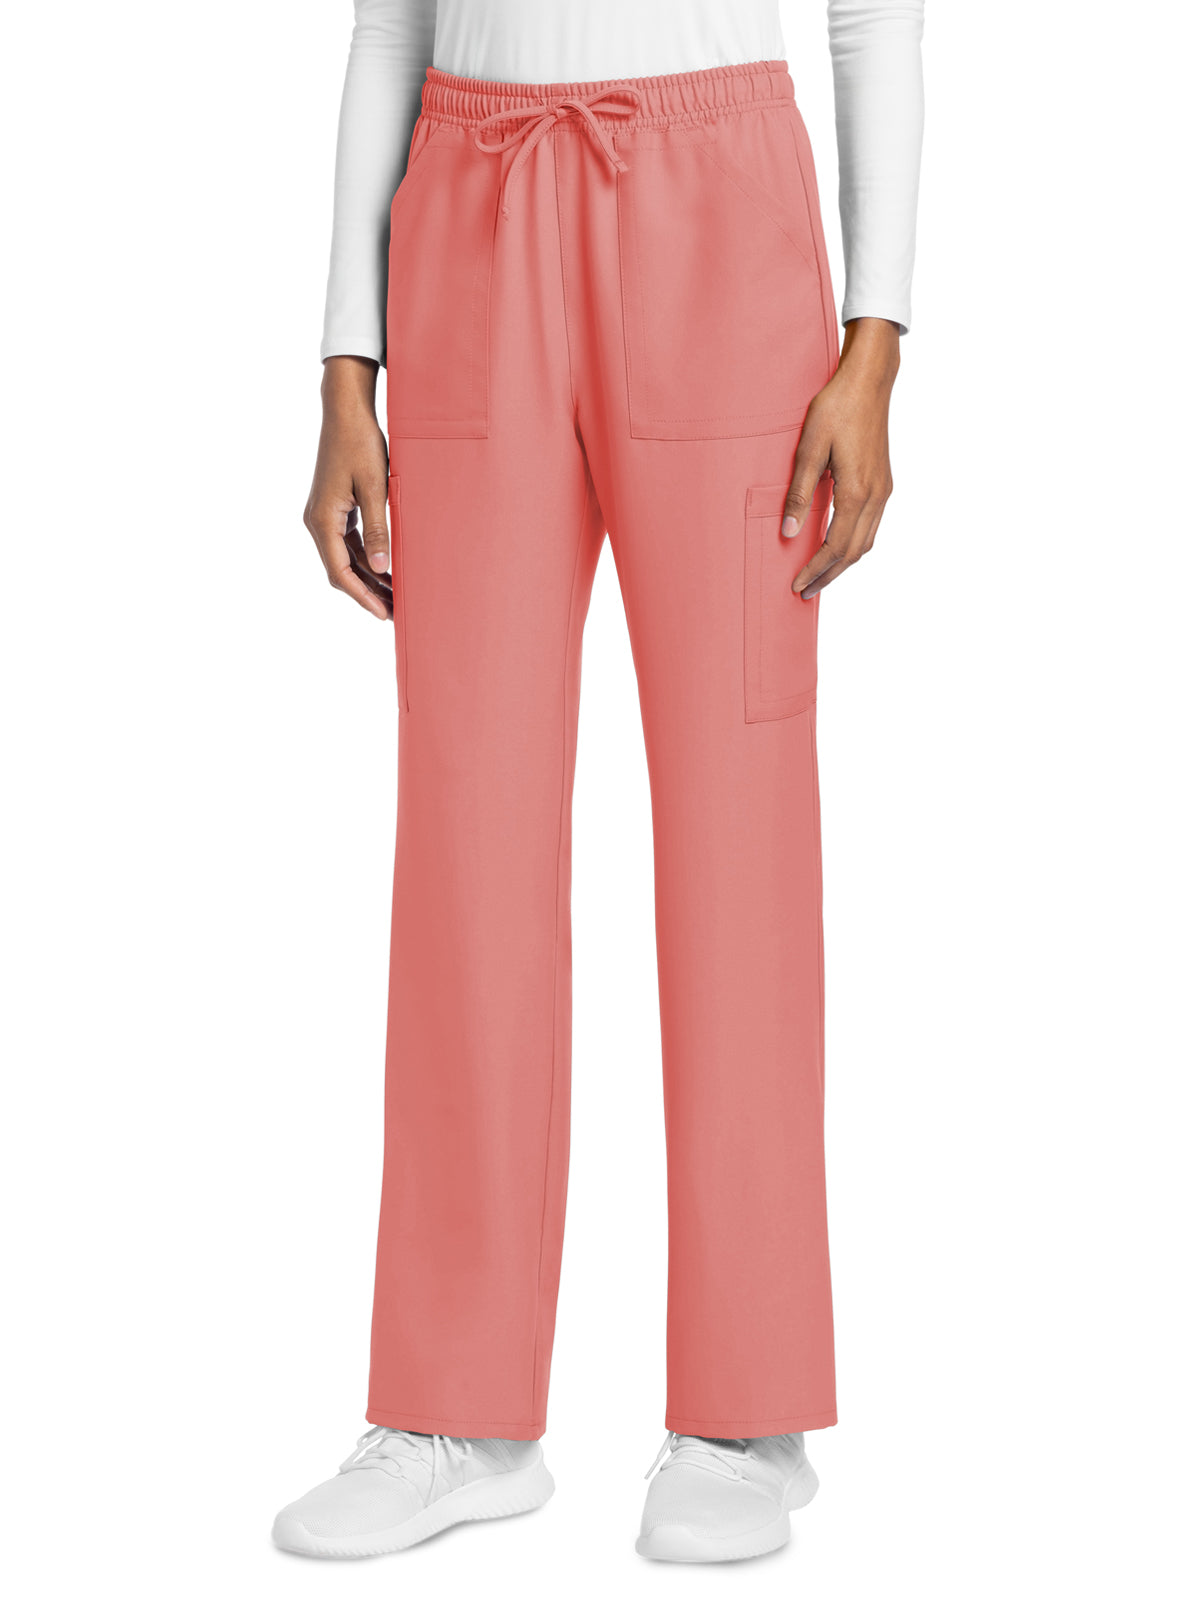 Women's 4-Pocket Drawstring Cargo Pant - CK272A - Spiced Coral